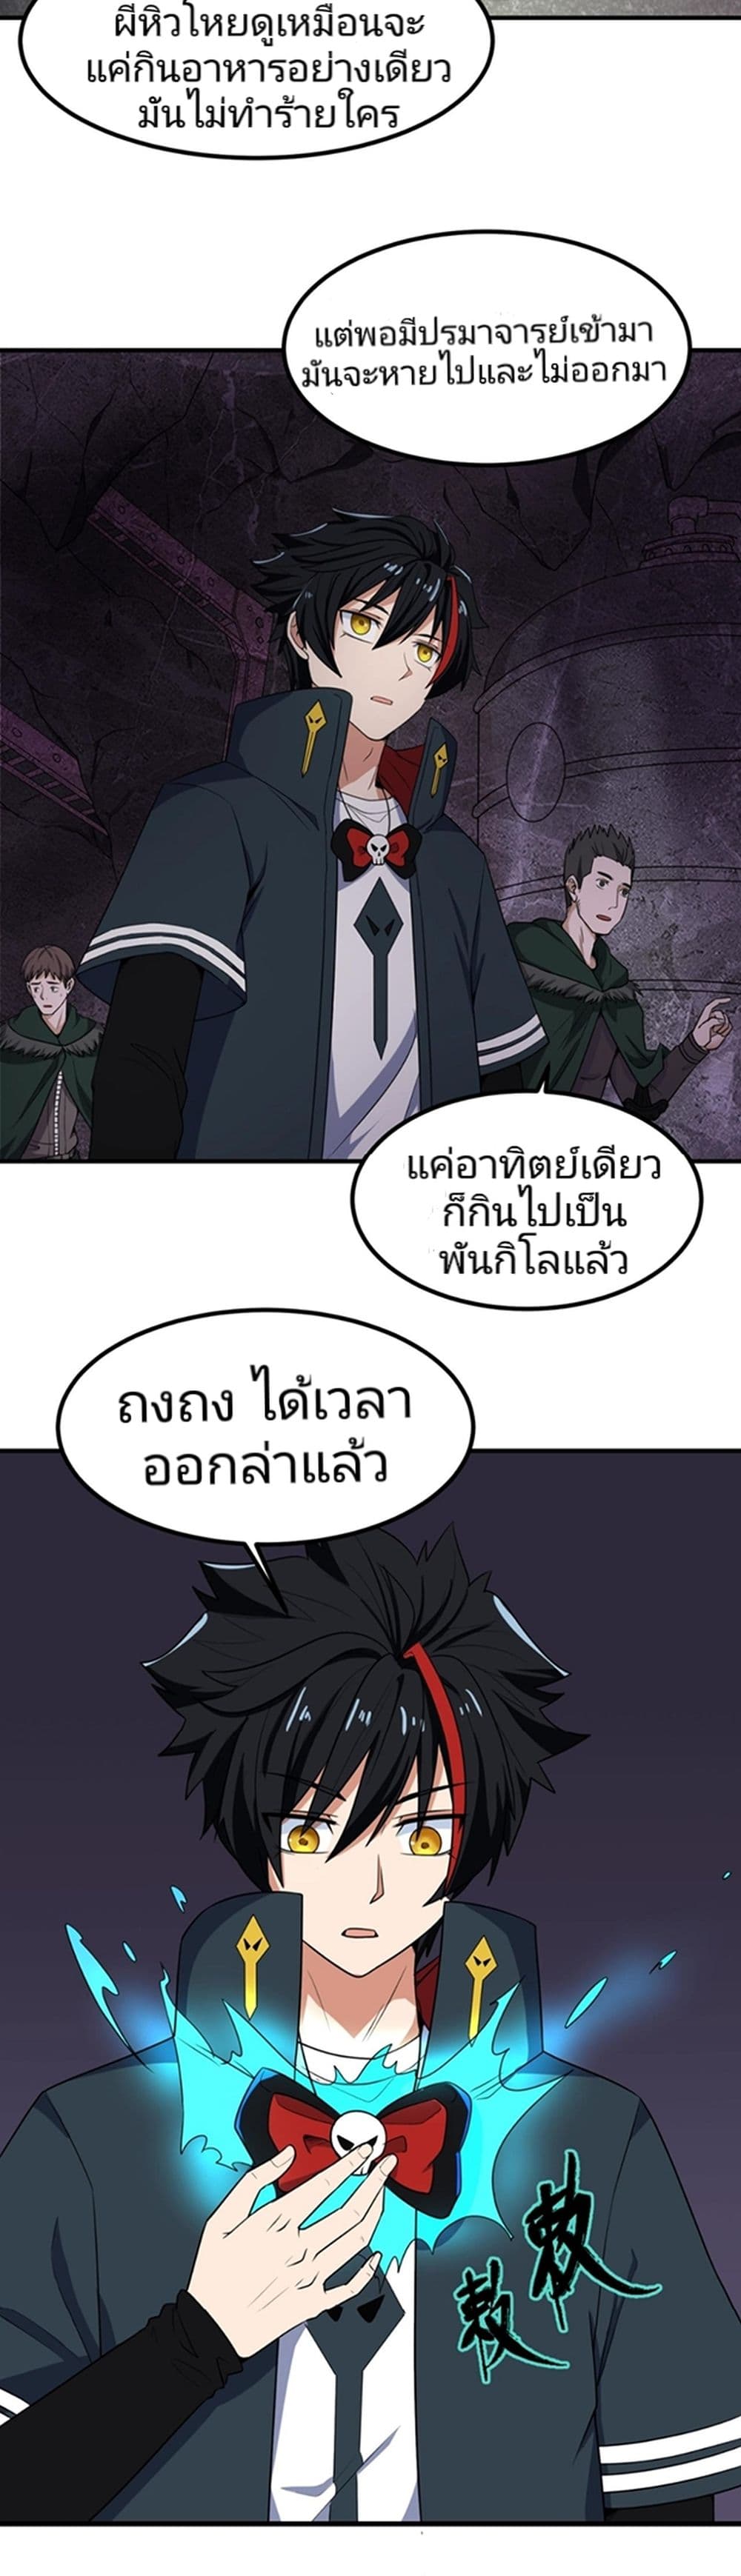 The Age of Ghost Spirits à¸à¸­à¸à¸à¸µà¹ 6 (37)